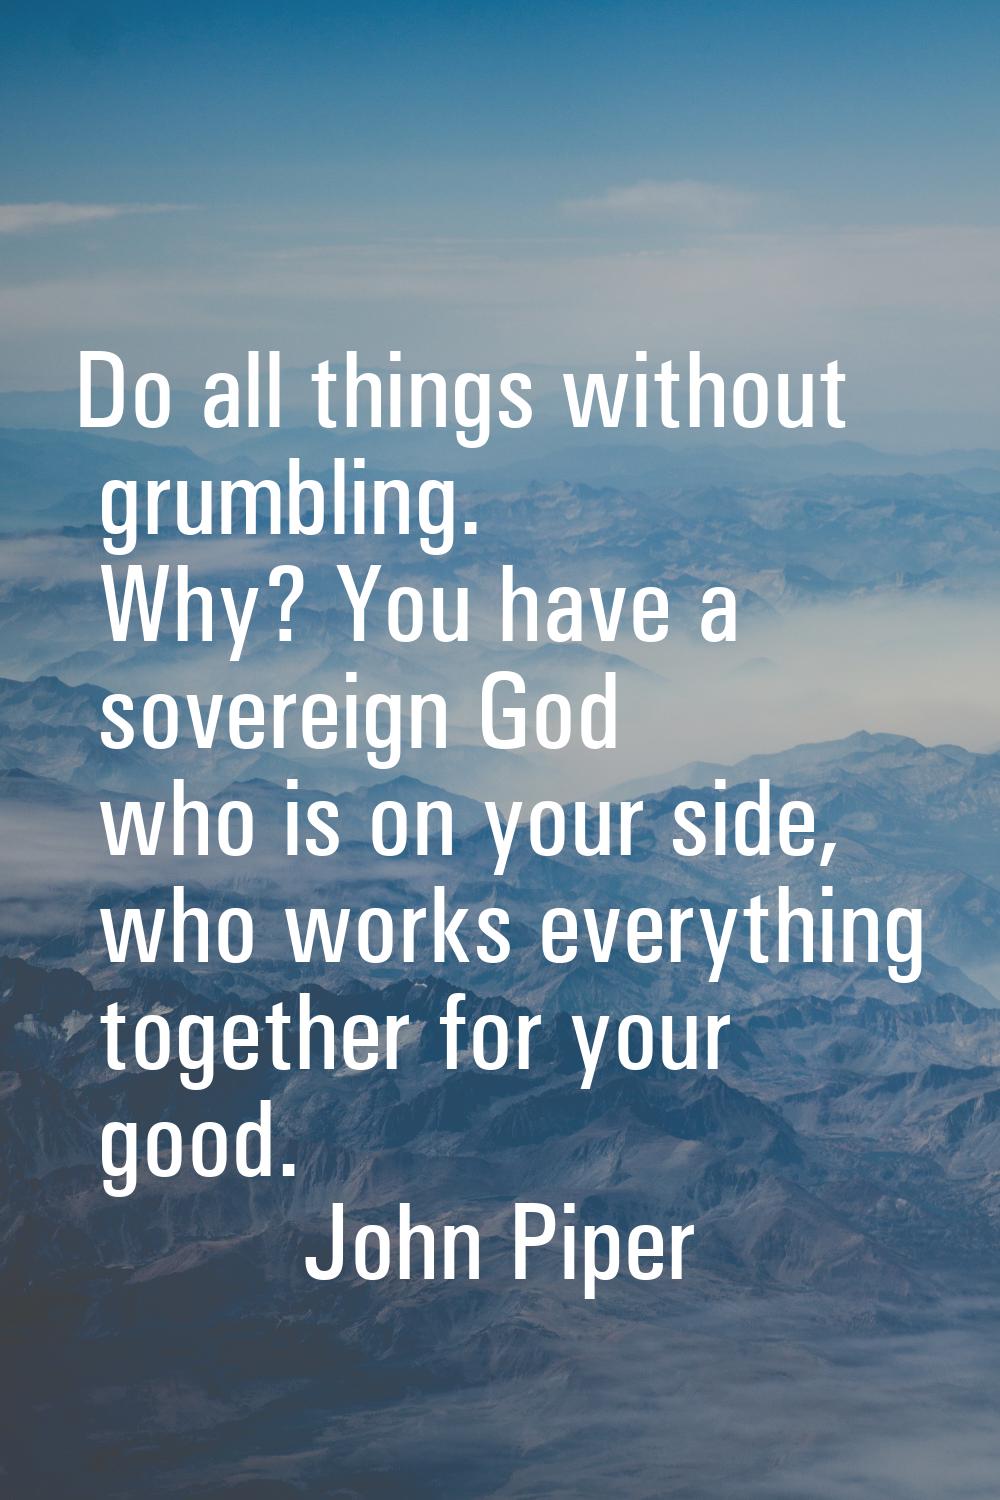 Do all things without grumbling. Why? You have a sovereign God who is on your side, who works every